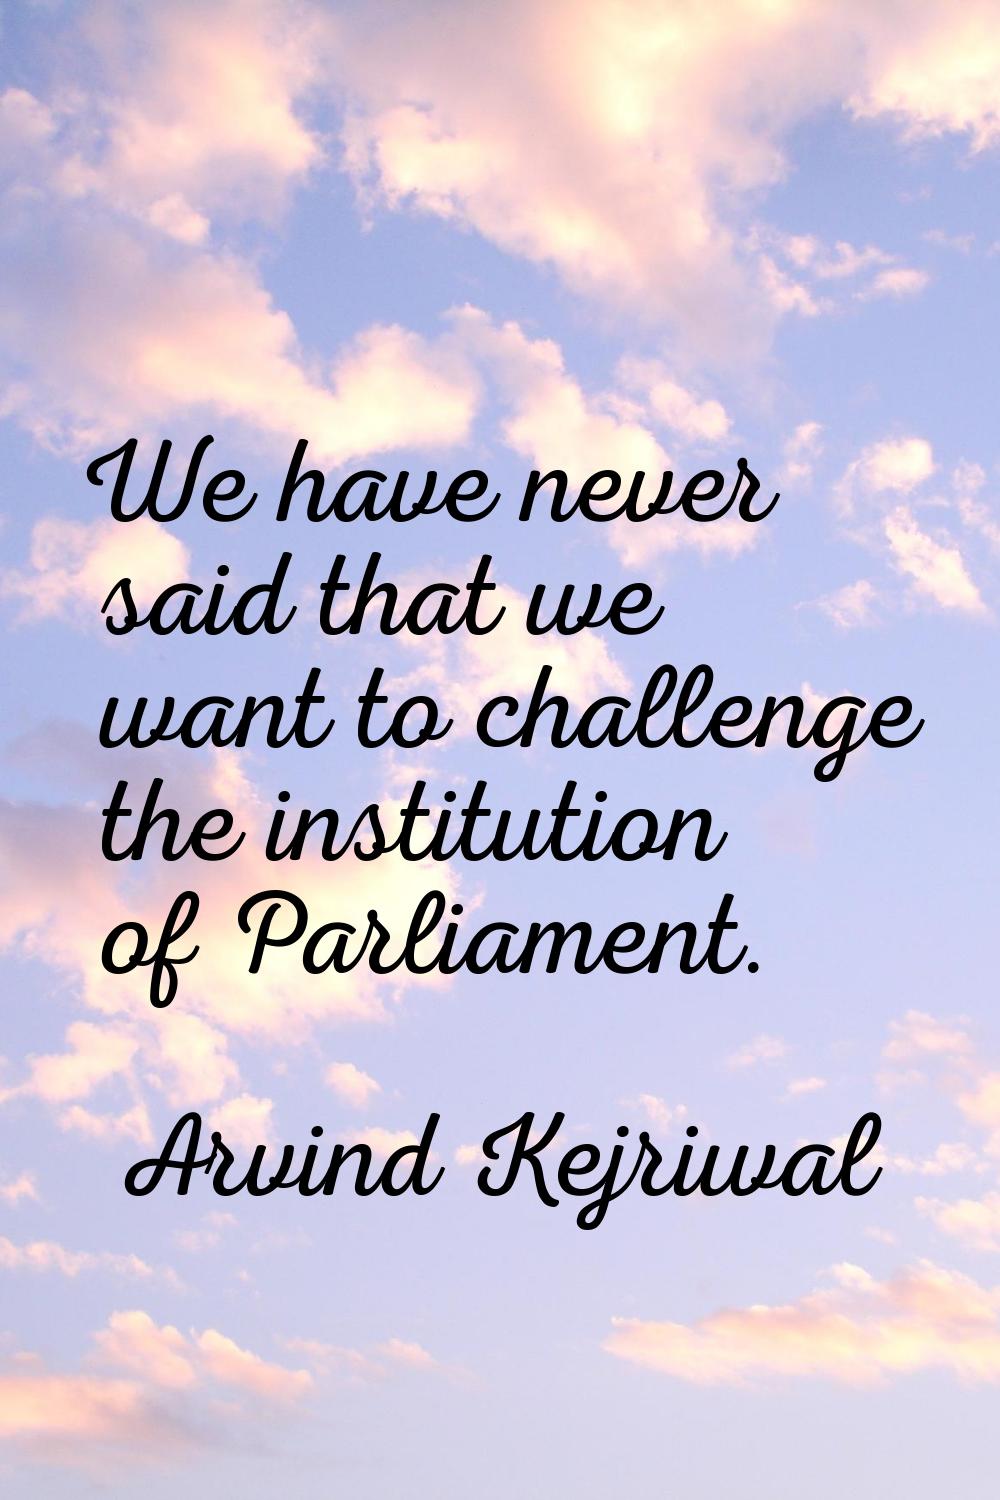 We have never said that we want to challenge the institution of Parliament.